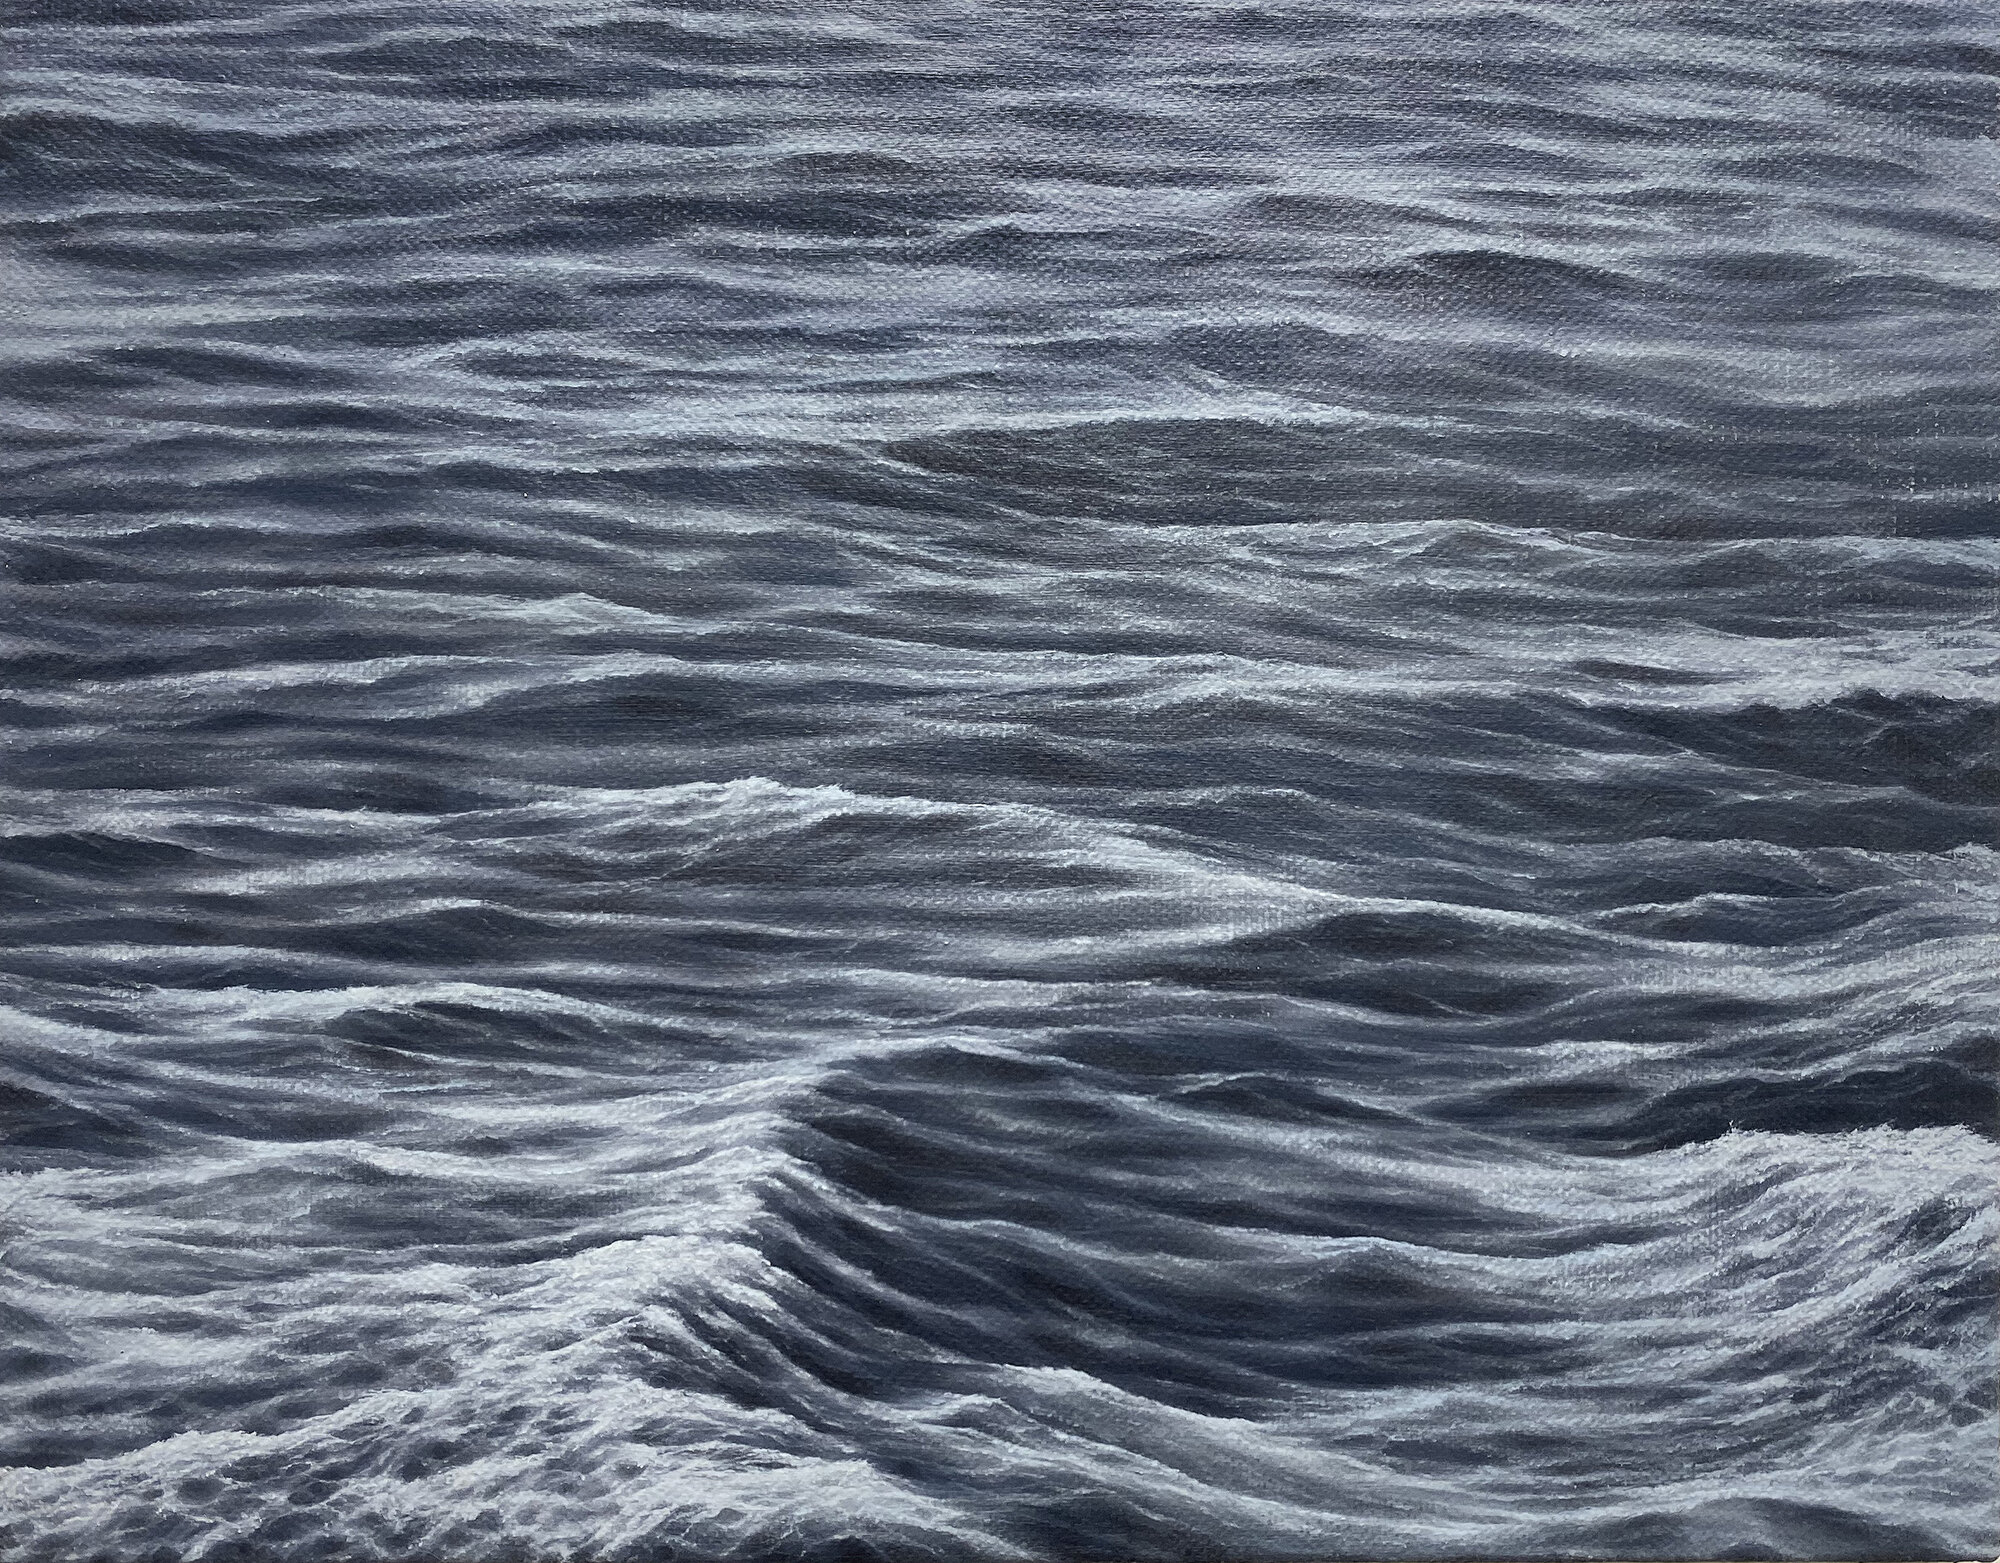 our wake, from the Antigua, Payne’s gray Arctic Ocean, 11” x 14”, oil on linen over panel, 2019